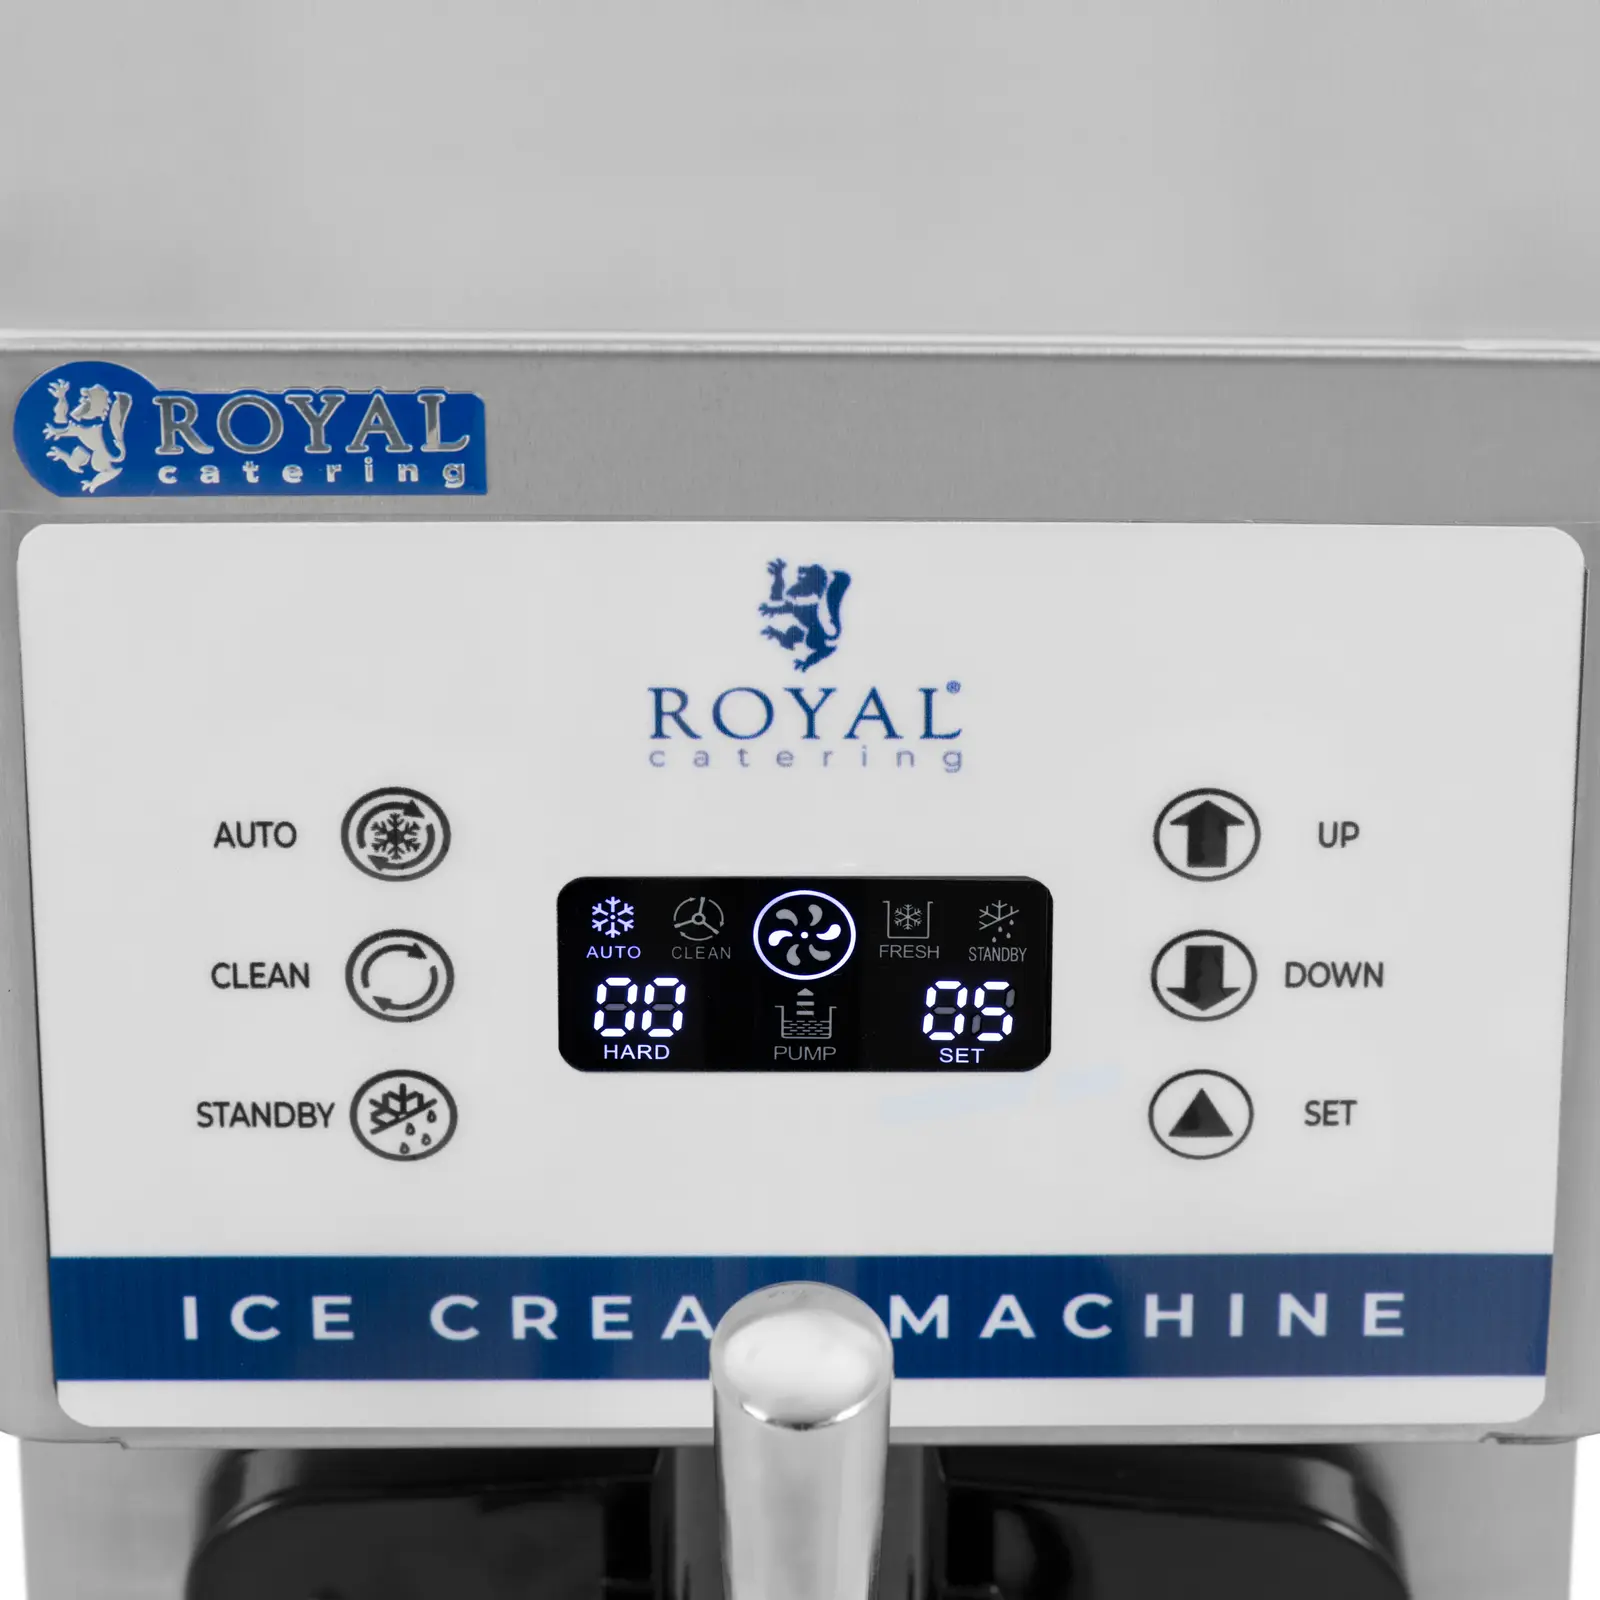 Softicemaskine - 800 W - 13 l/t - LED - Royal Catering